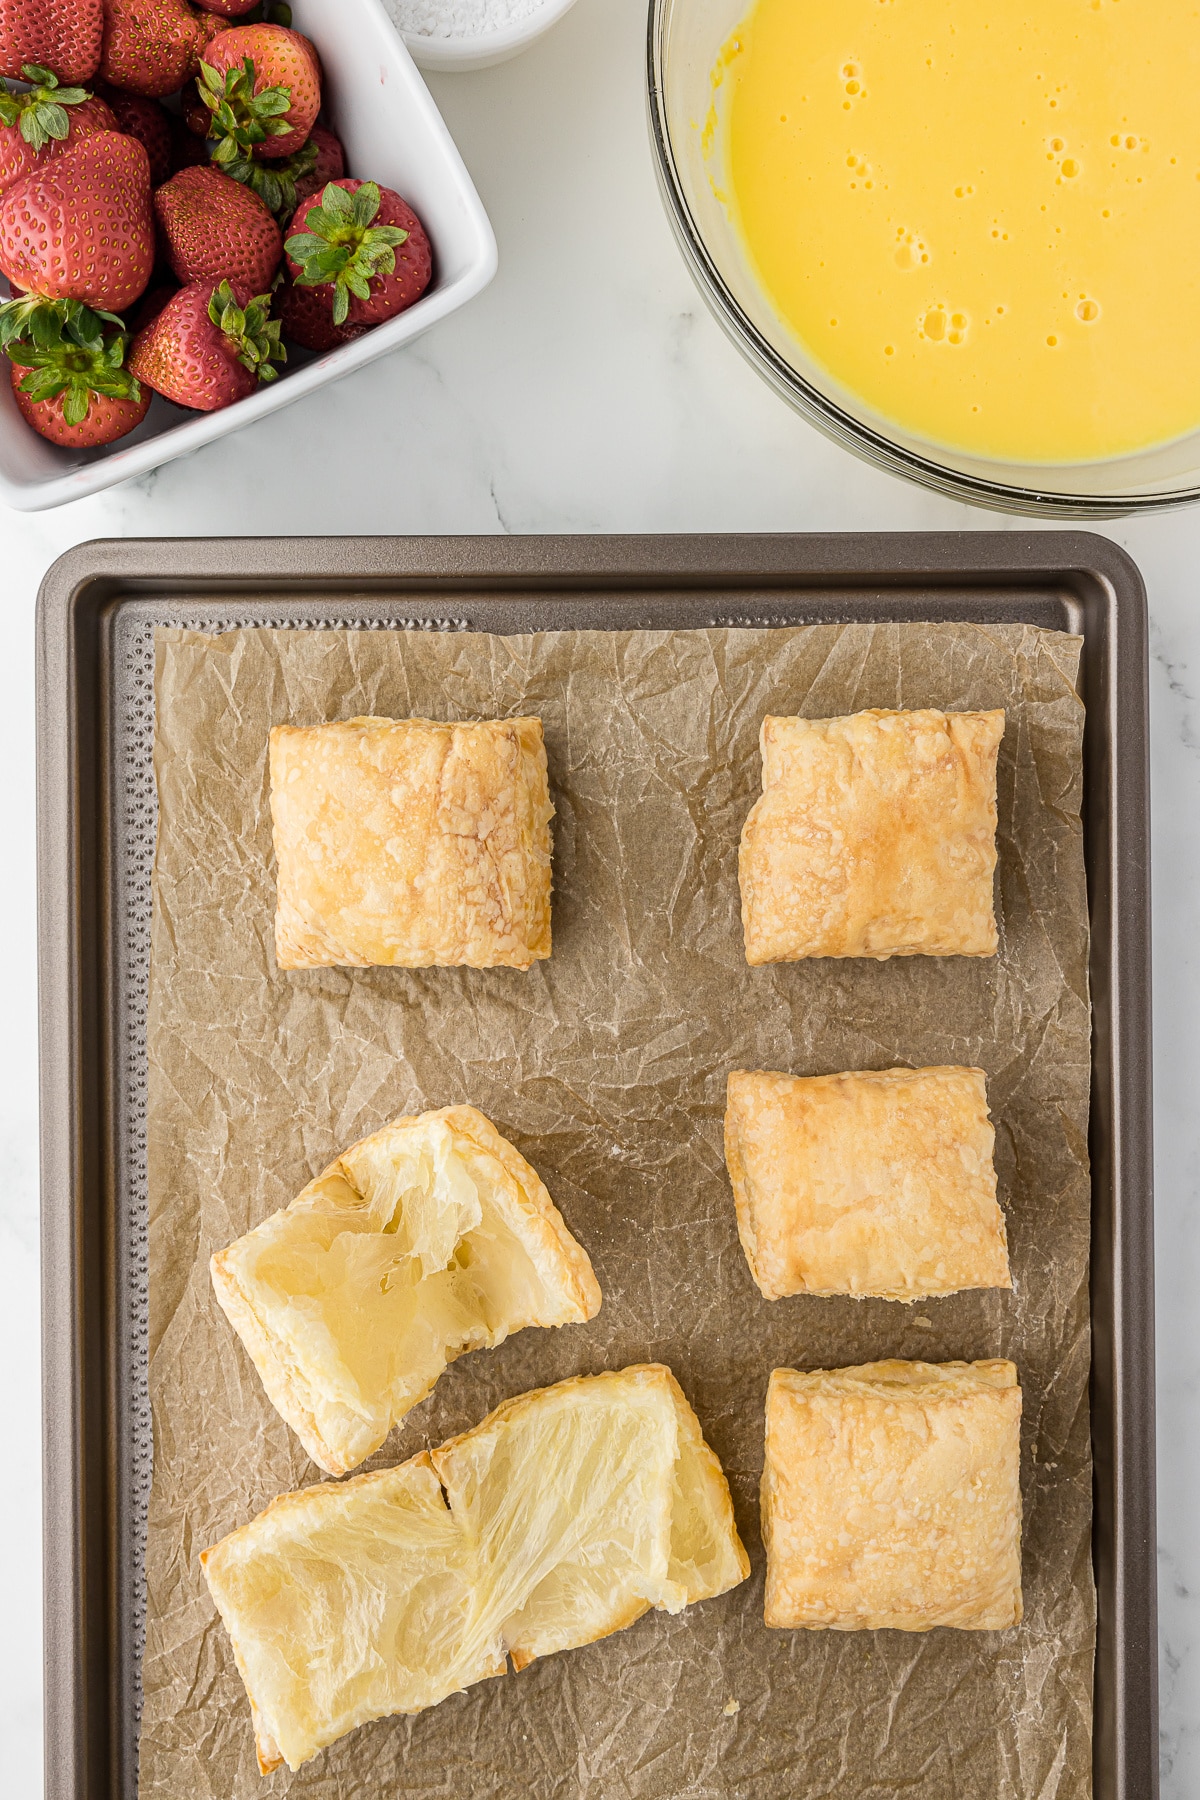 Puffed pastry squares on a baking sheet with parchment paper and a bowl of strawberries and custard in the background